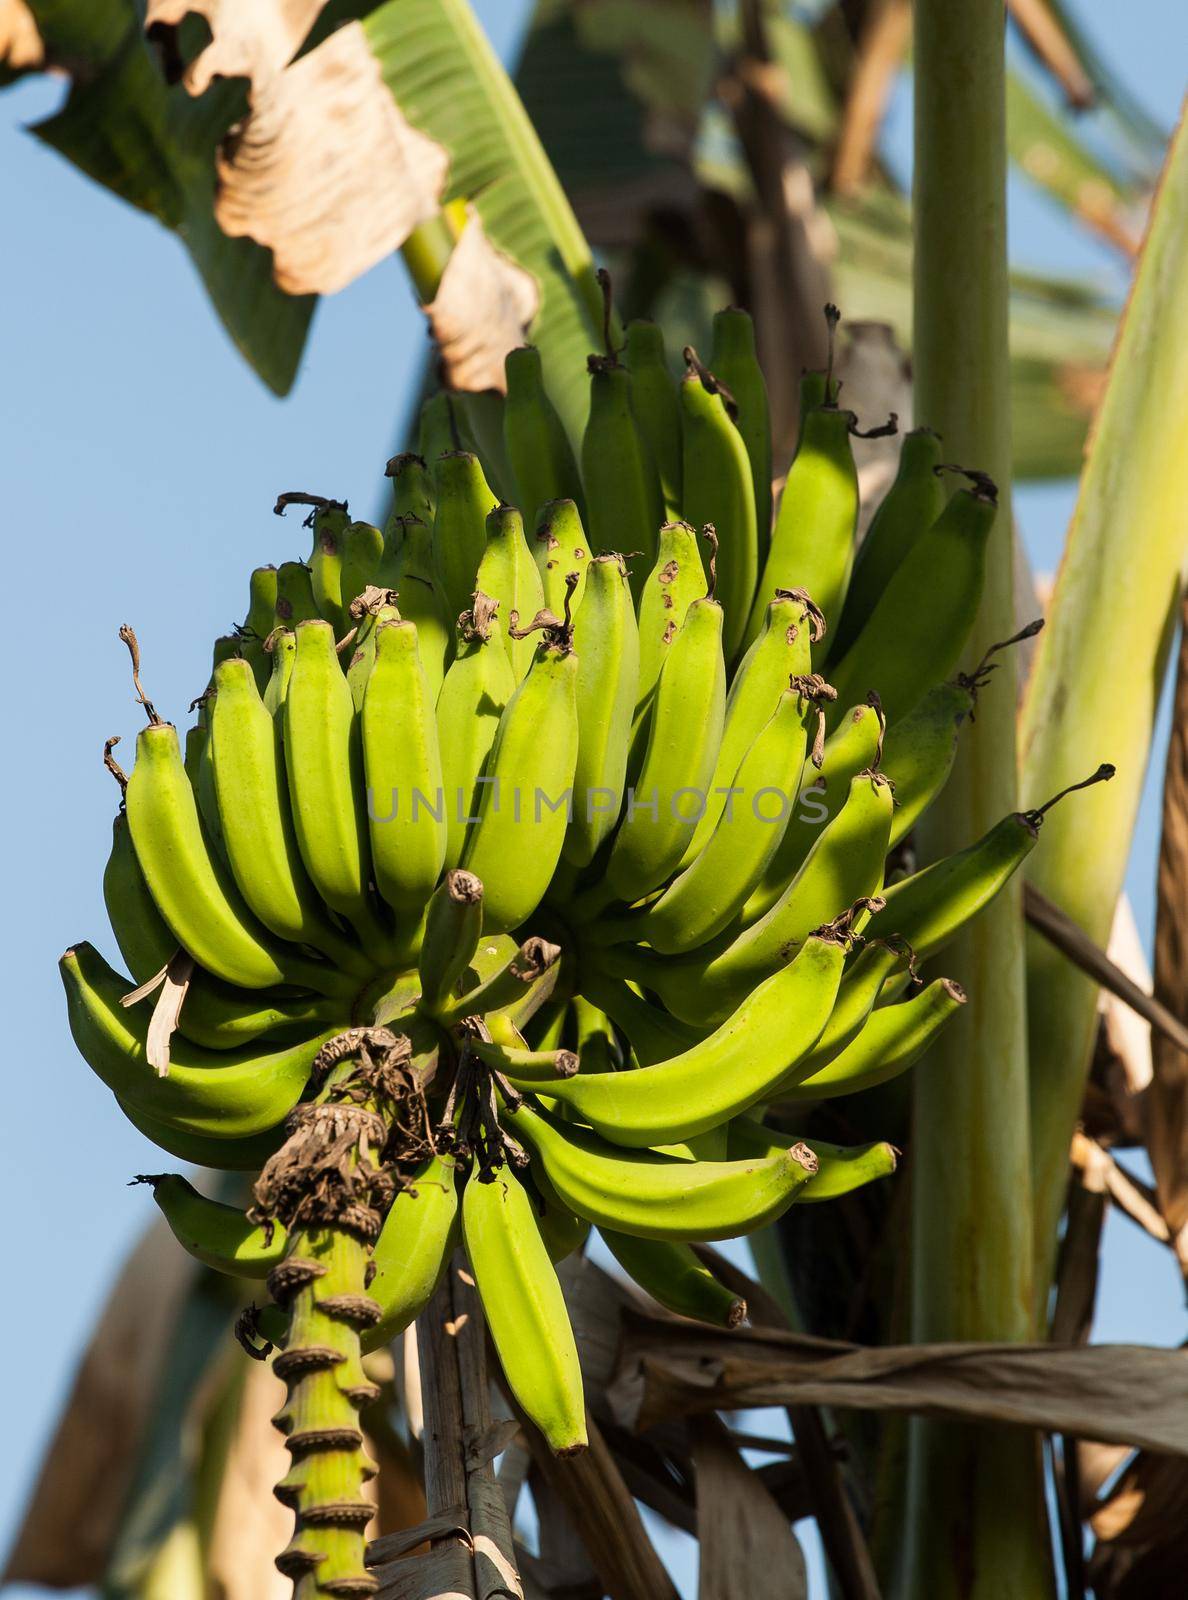 A bunch of unripe green bananas on a tree by snep_photo